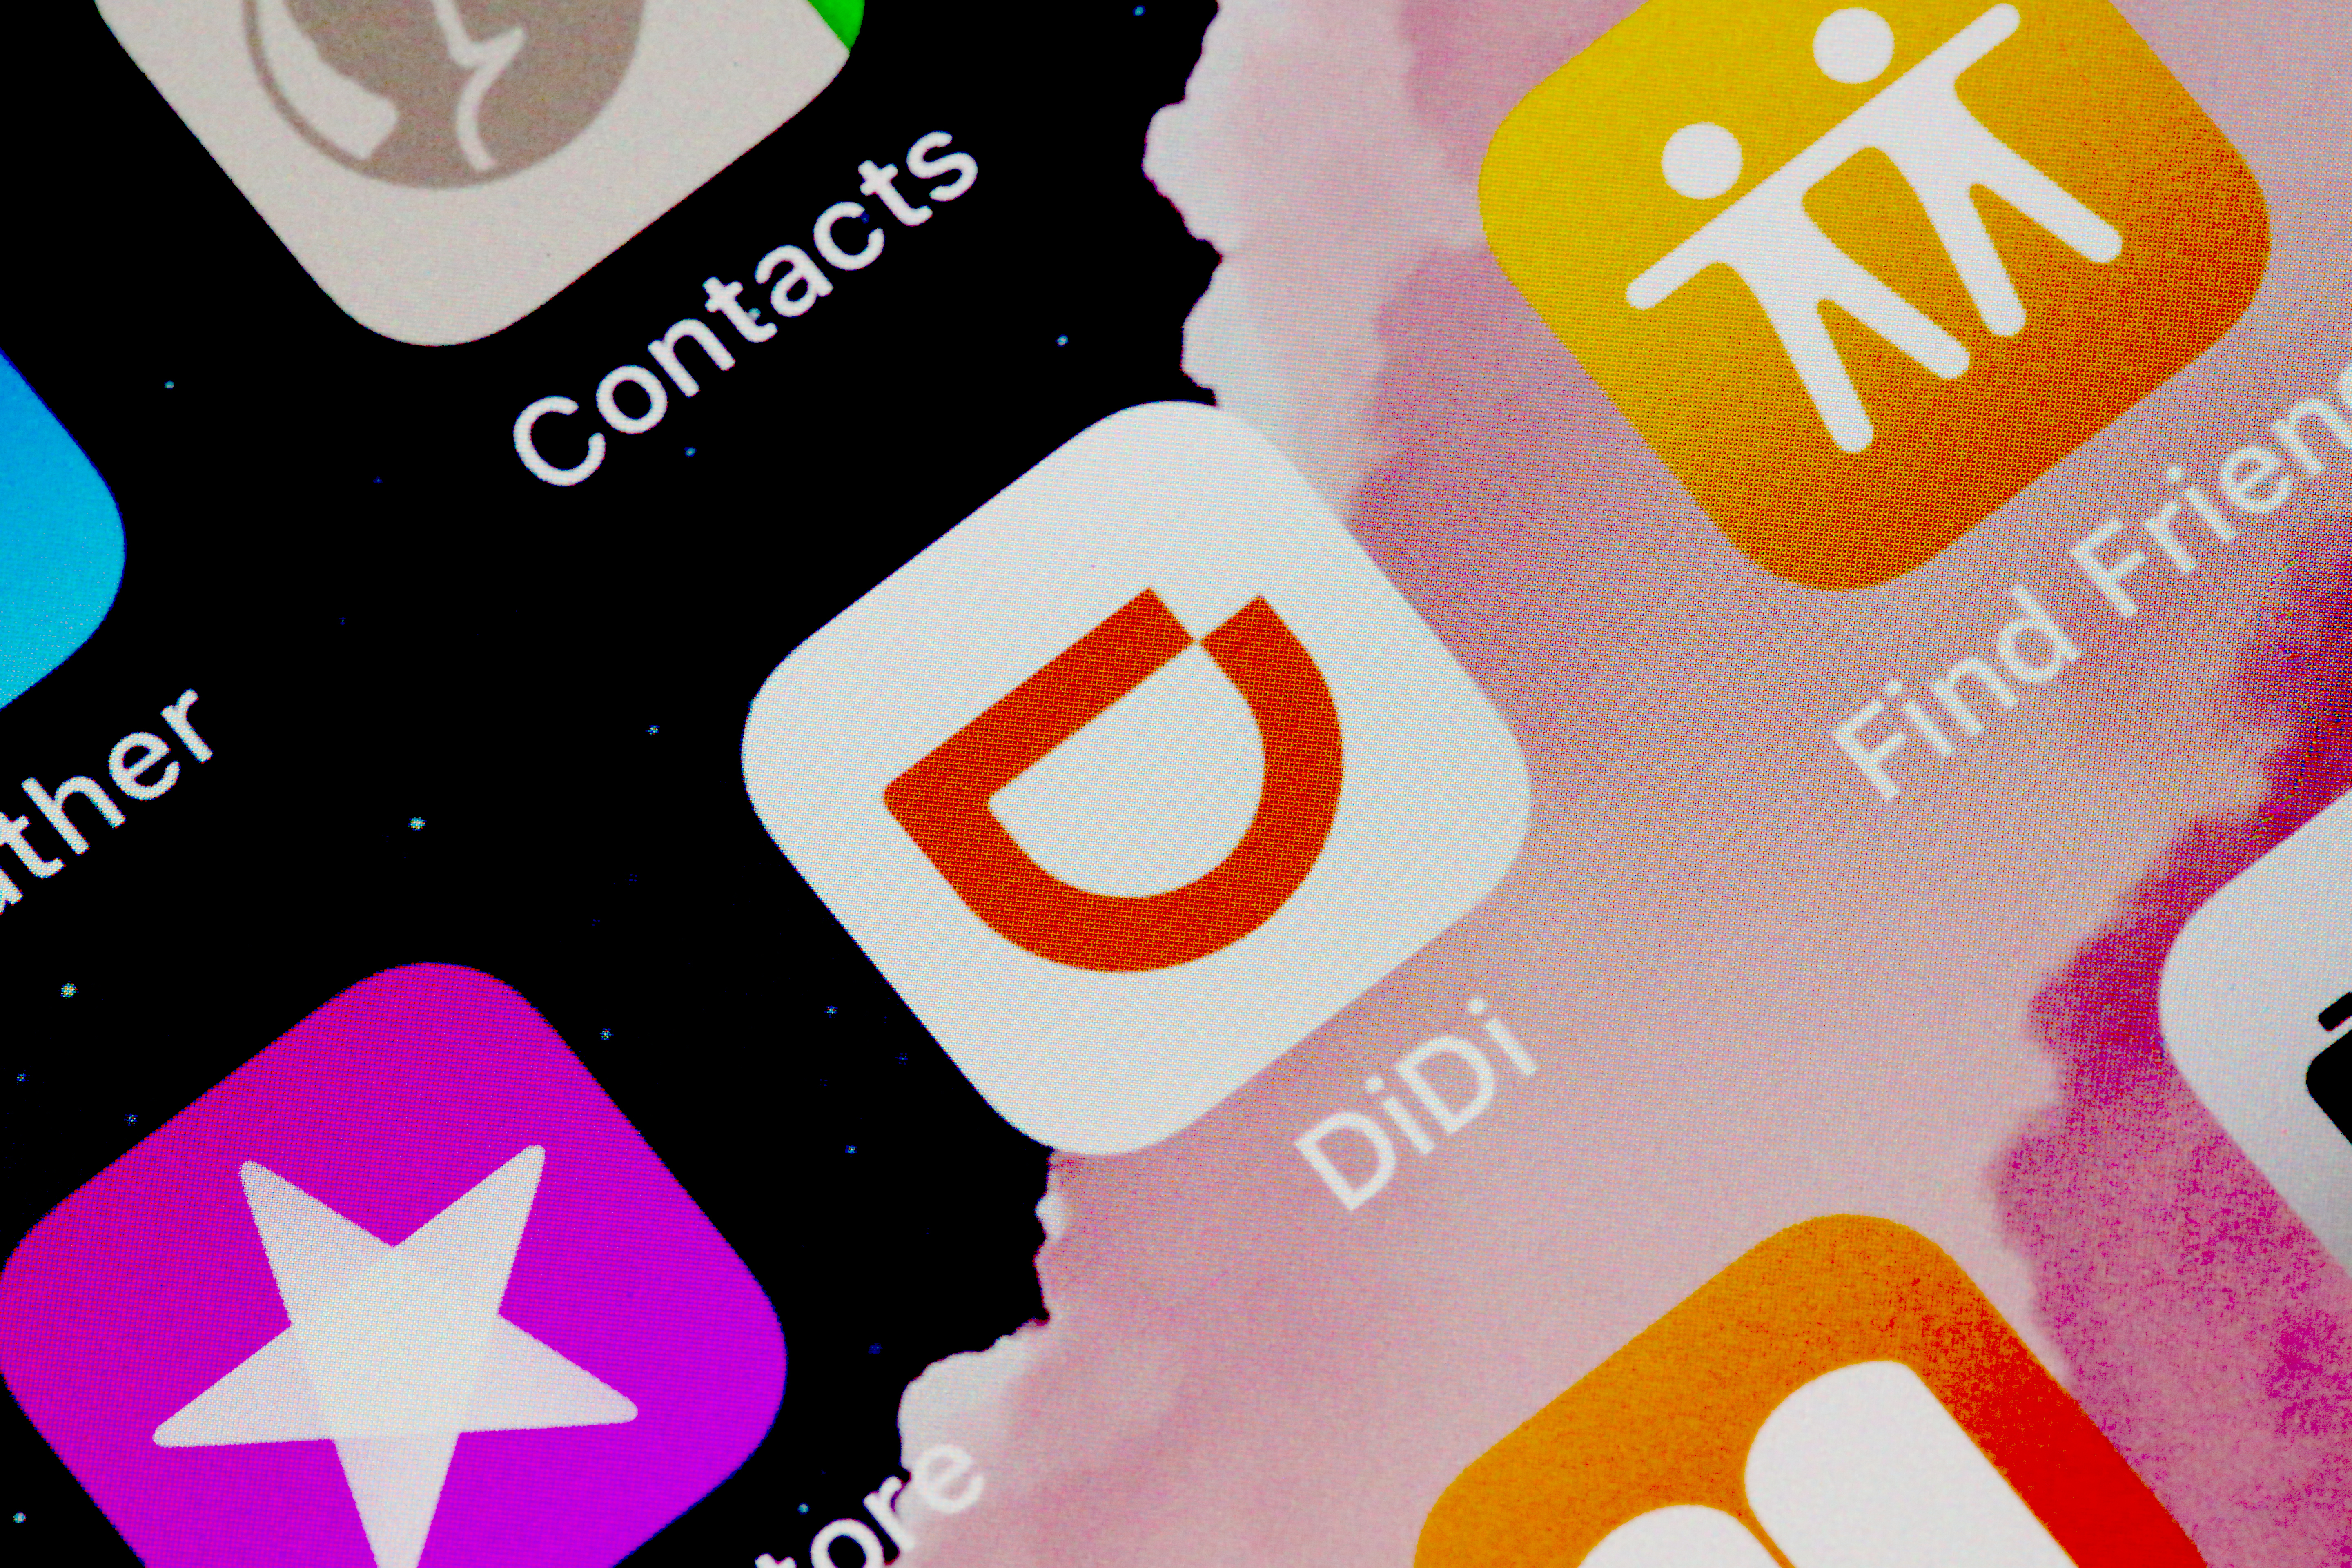 Didi Chuxing says it will partner with Chinese car makers, not acquire